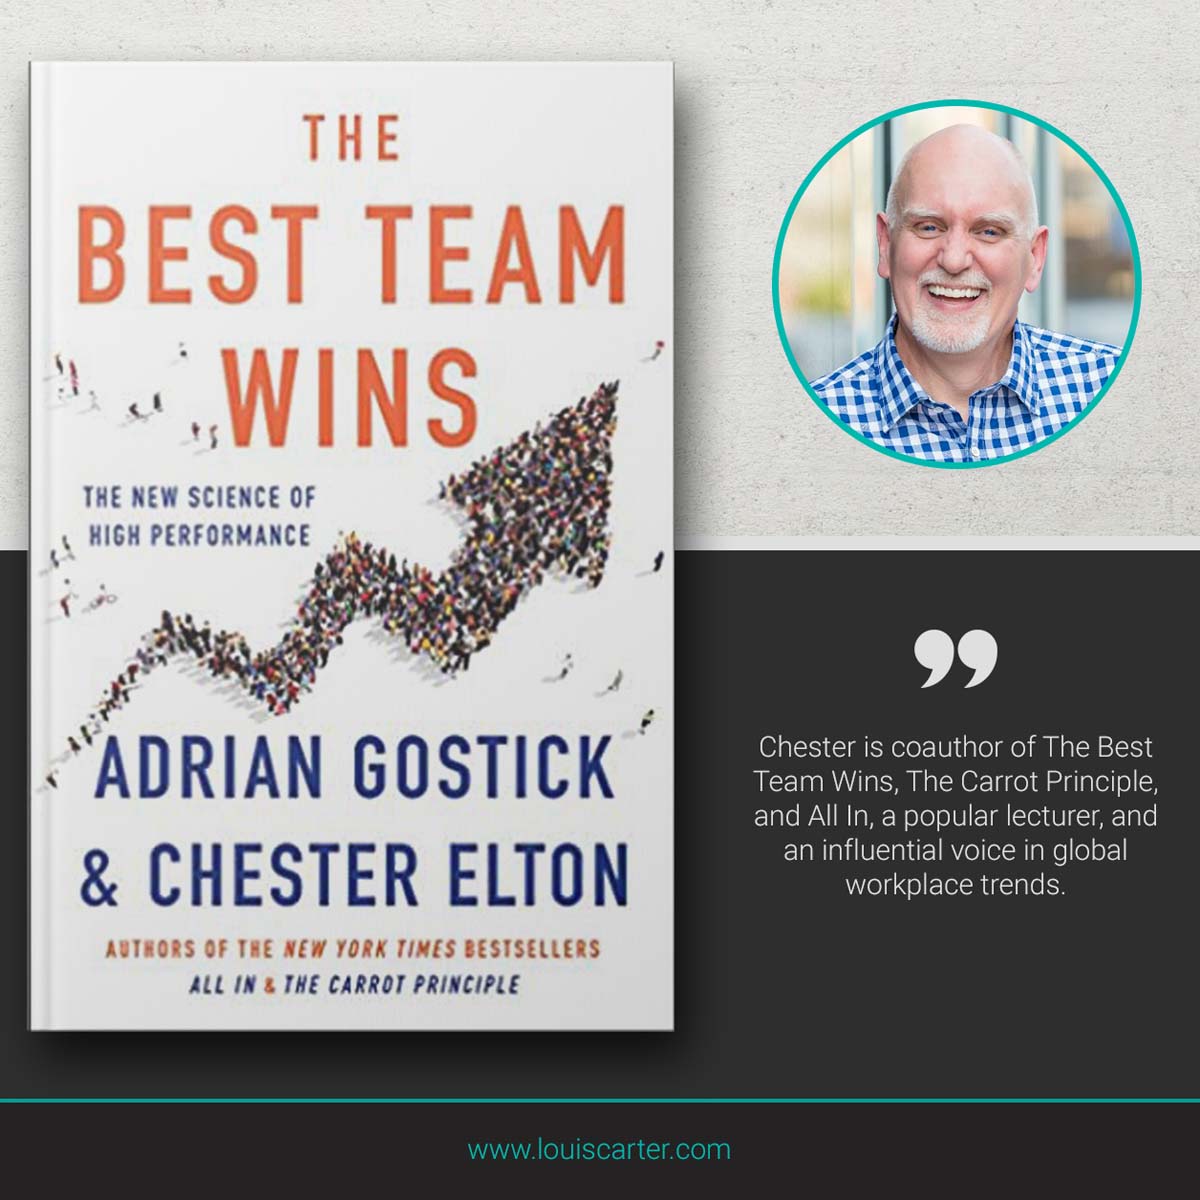 Picture of The Best Team Wins best book on leadership by Chester Elton